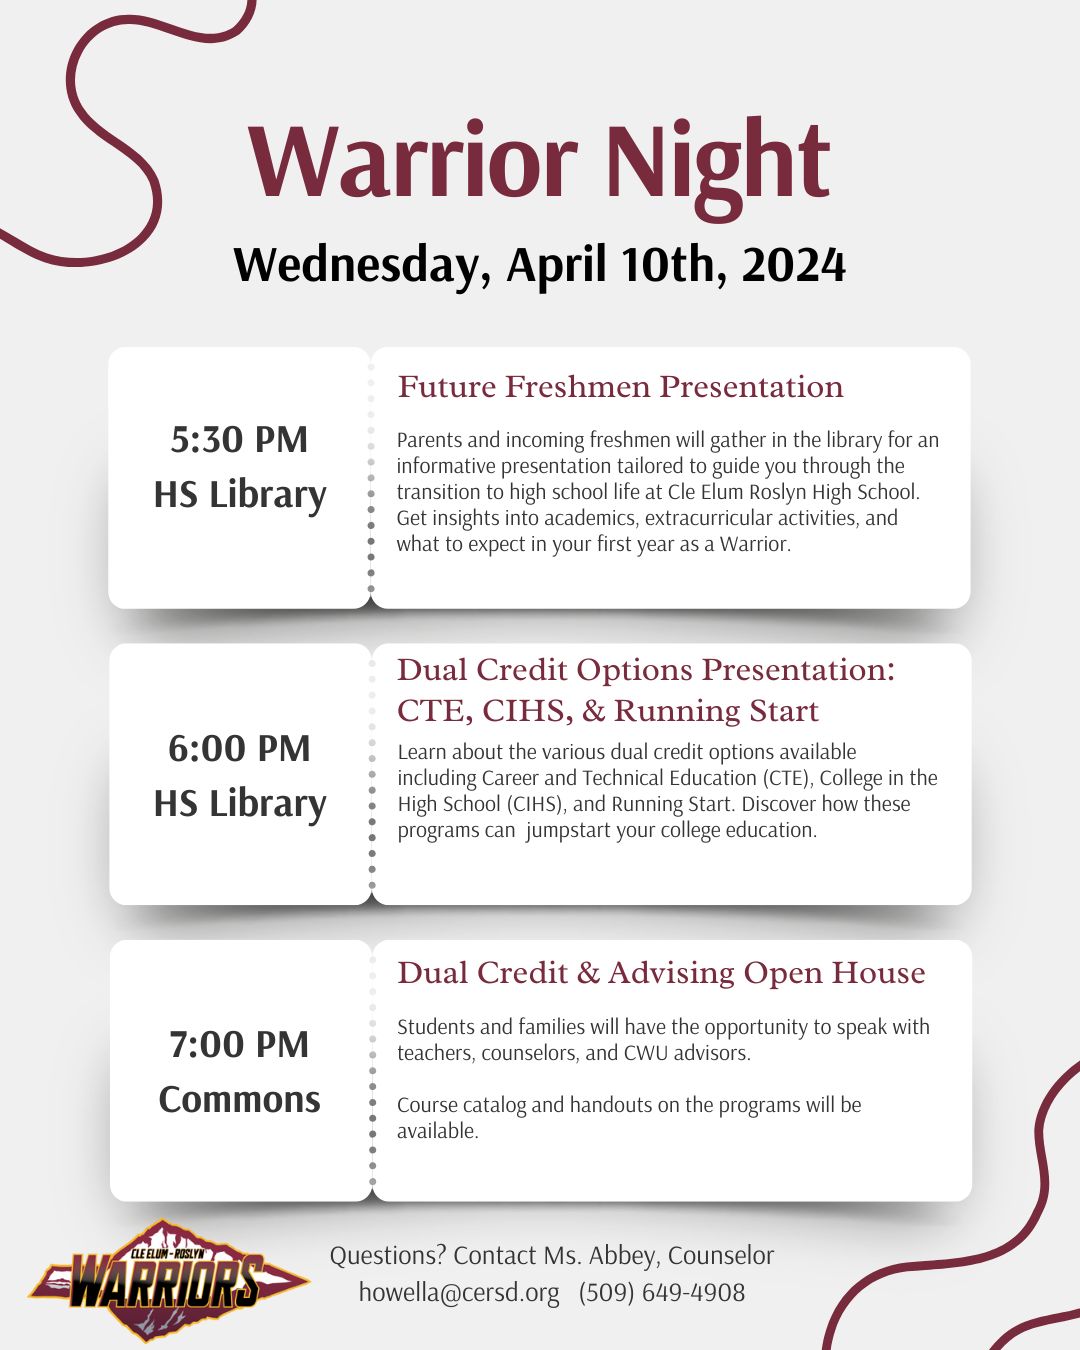 Warrior Night is April 10th. 5:30PM Future Freshman Presentation. 6PM College Info. 7PM Open House. All located at the high school library and commons. If you have questions contact Abbey the counselor at 509-649-4908